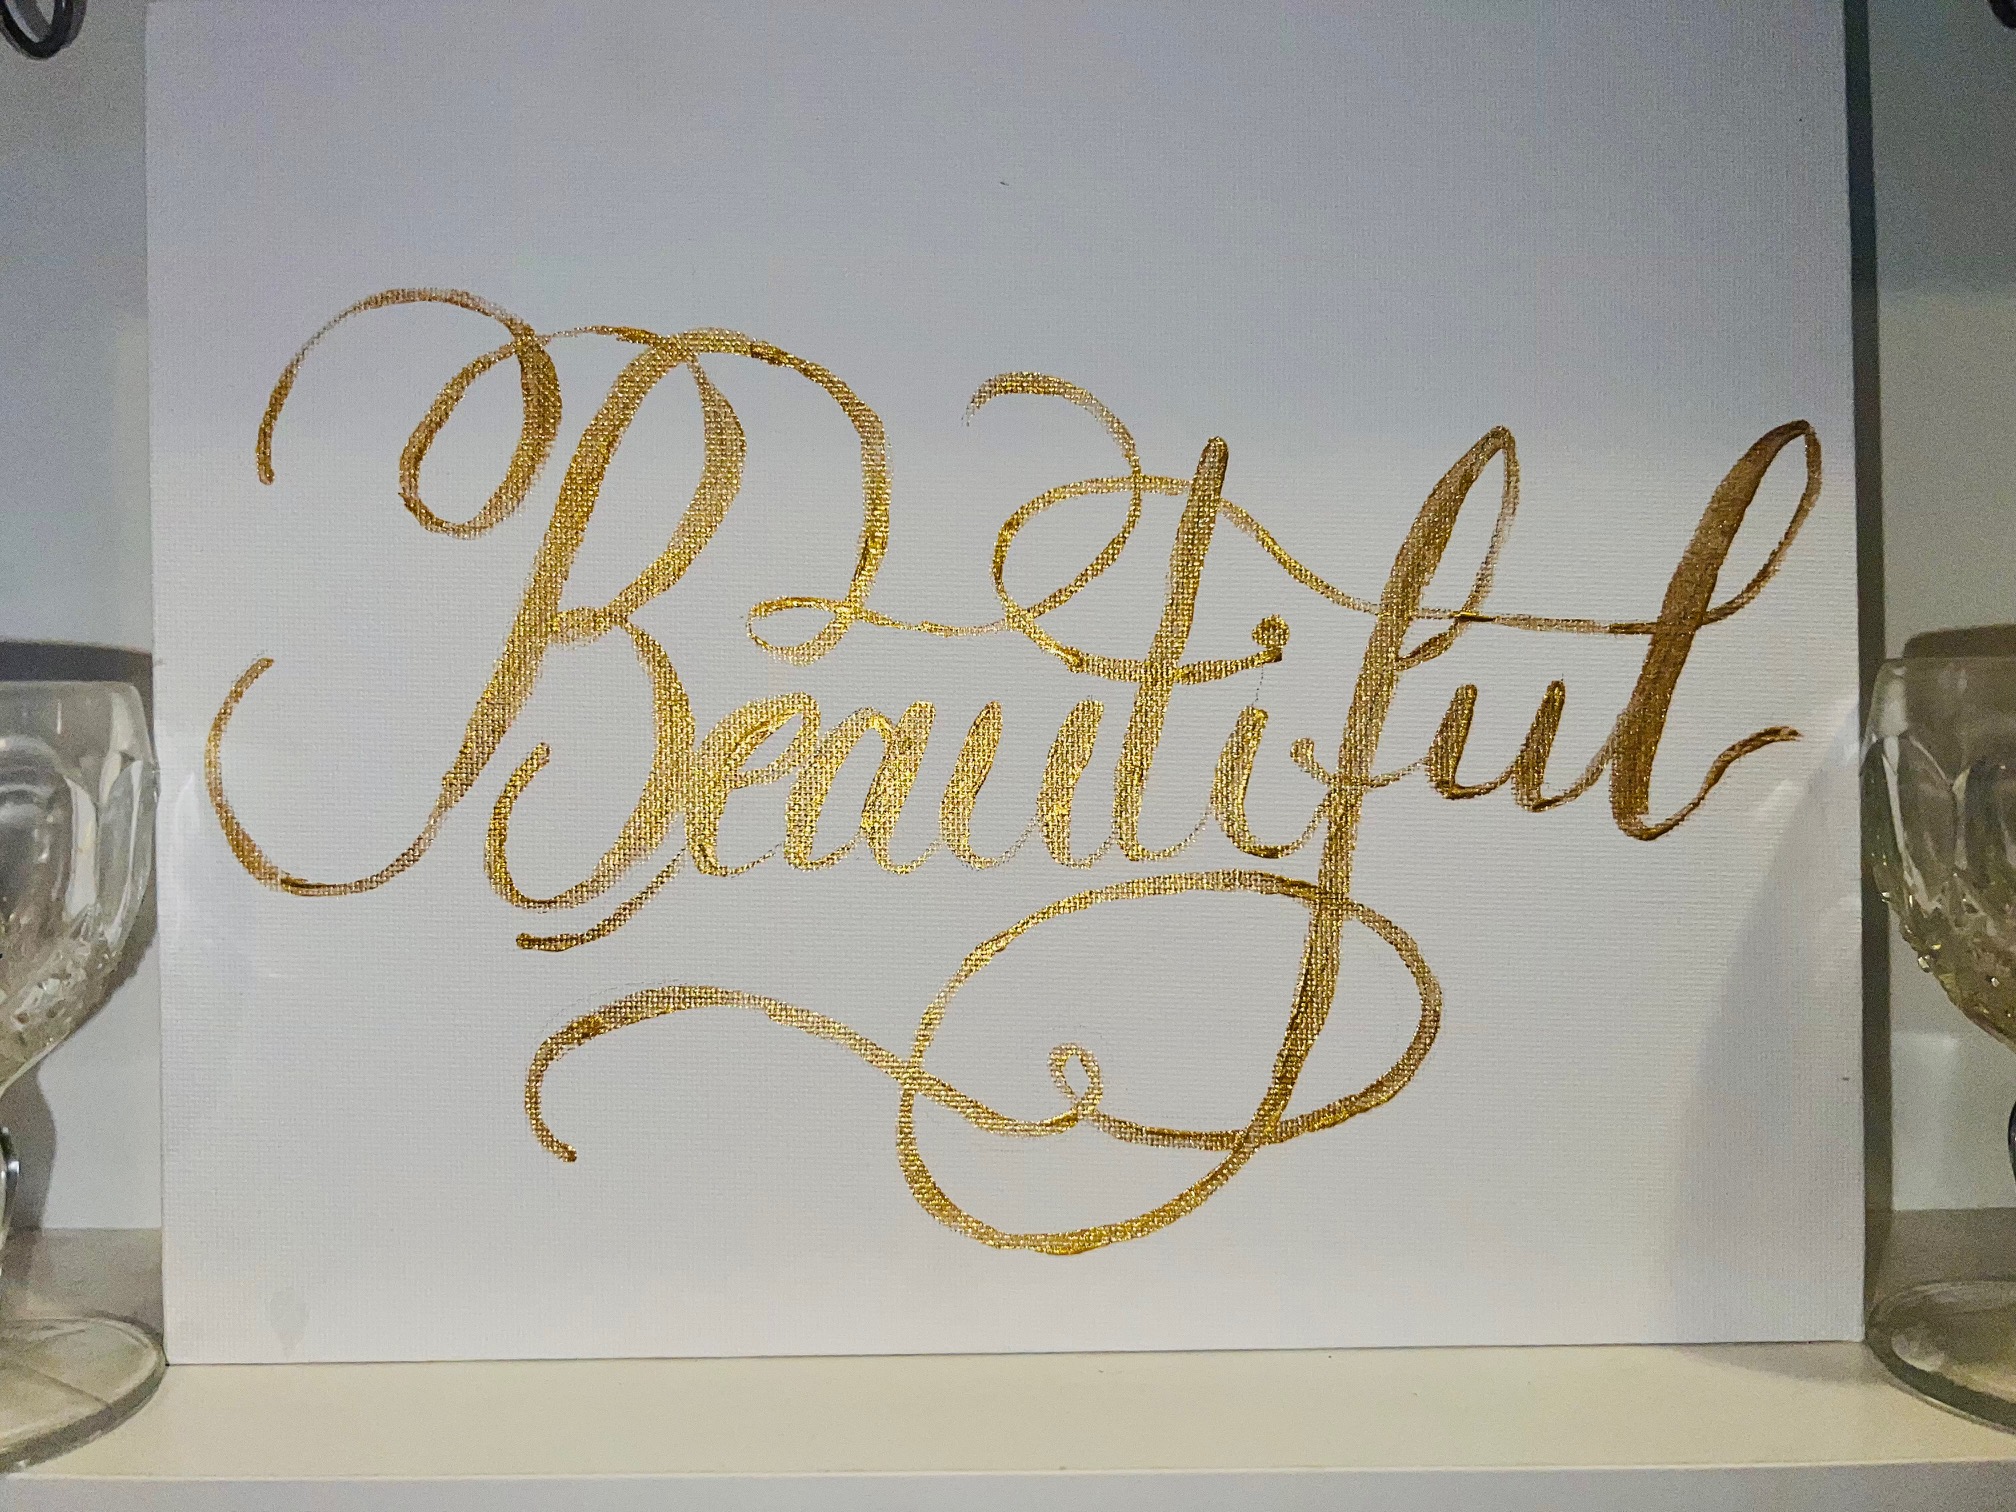 The word Beautiful painted in gold on a canvas board